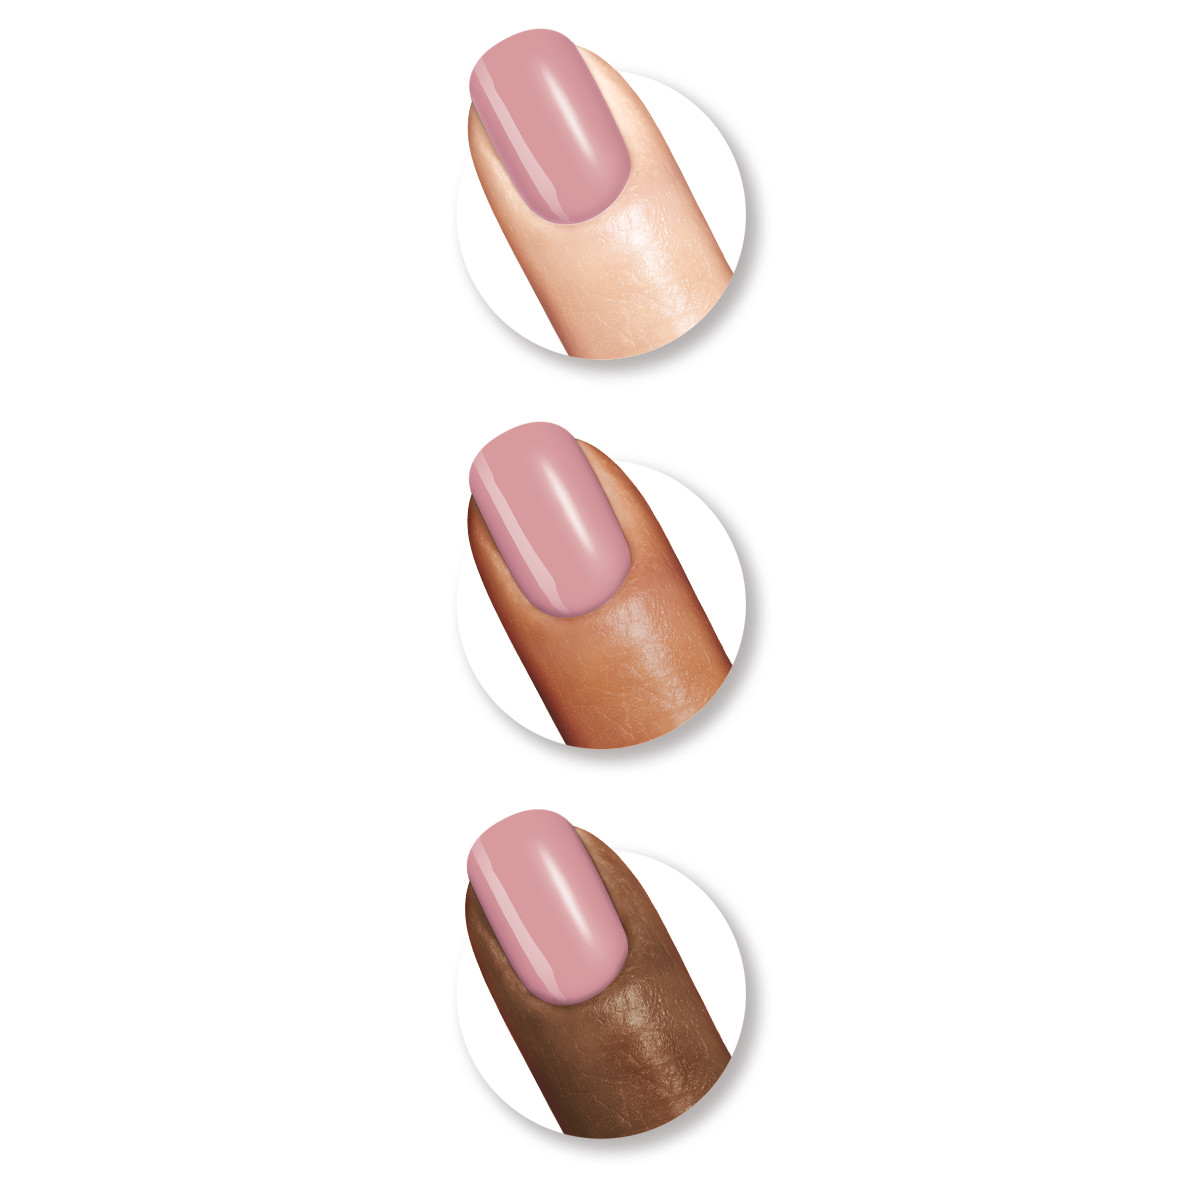 Sally Hansen Complete Salon Manicure Nail Color, Rose to the Occasion - image 2 of 2